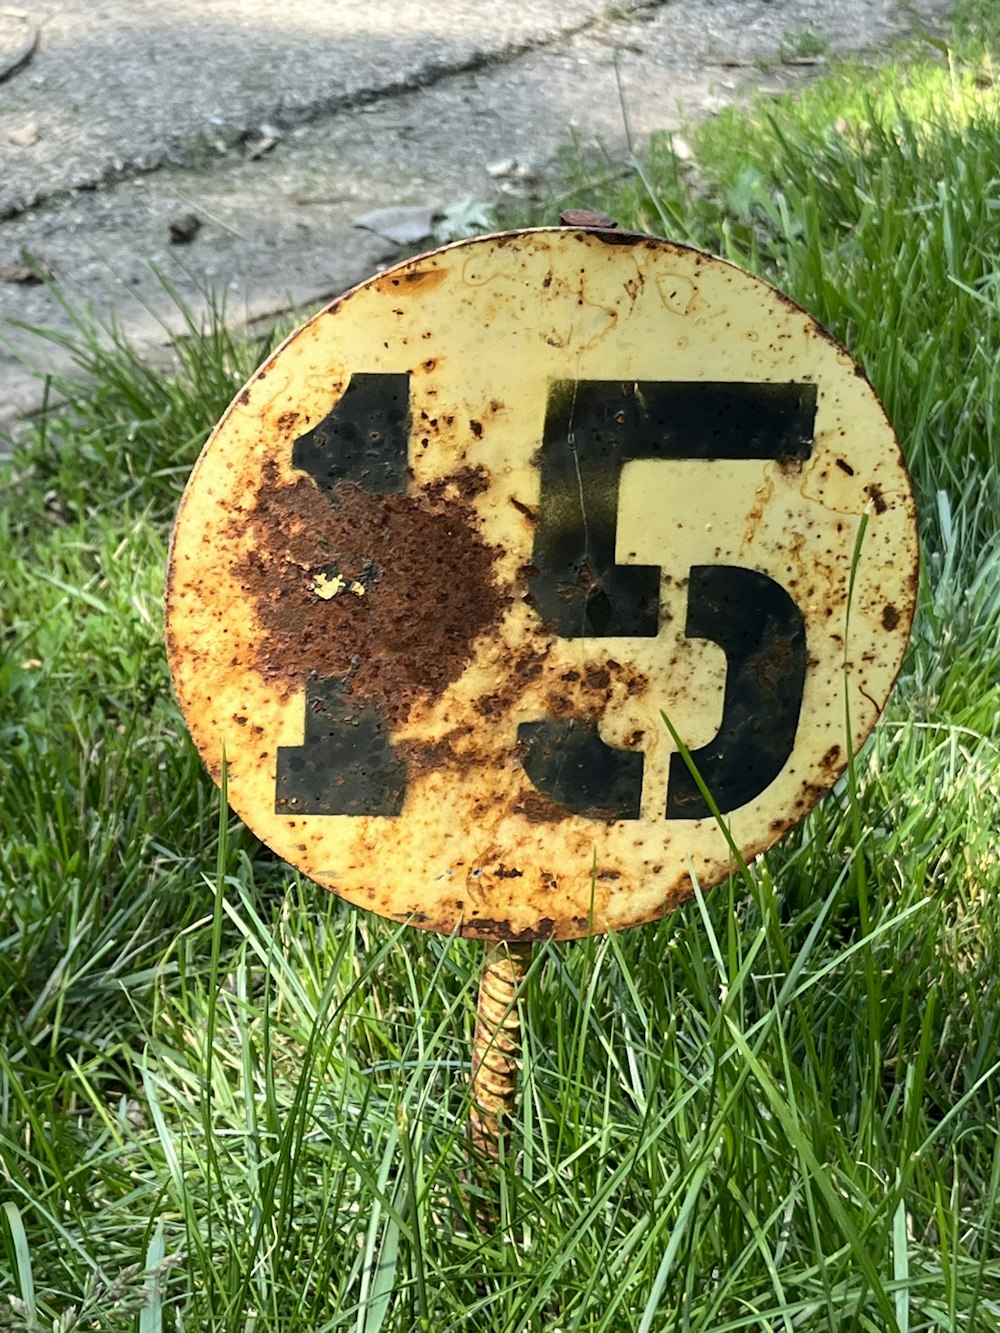 a round yellow object with a face drawn on it in grass